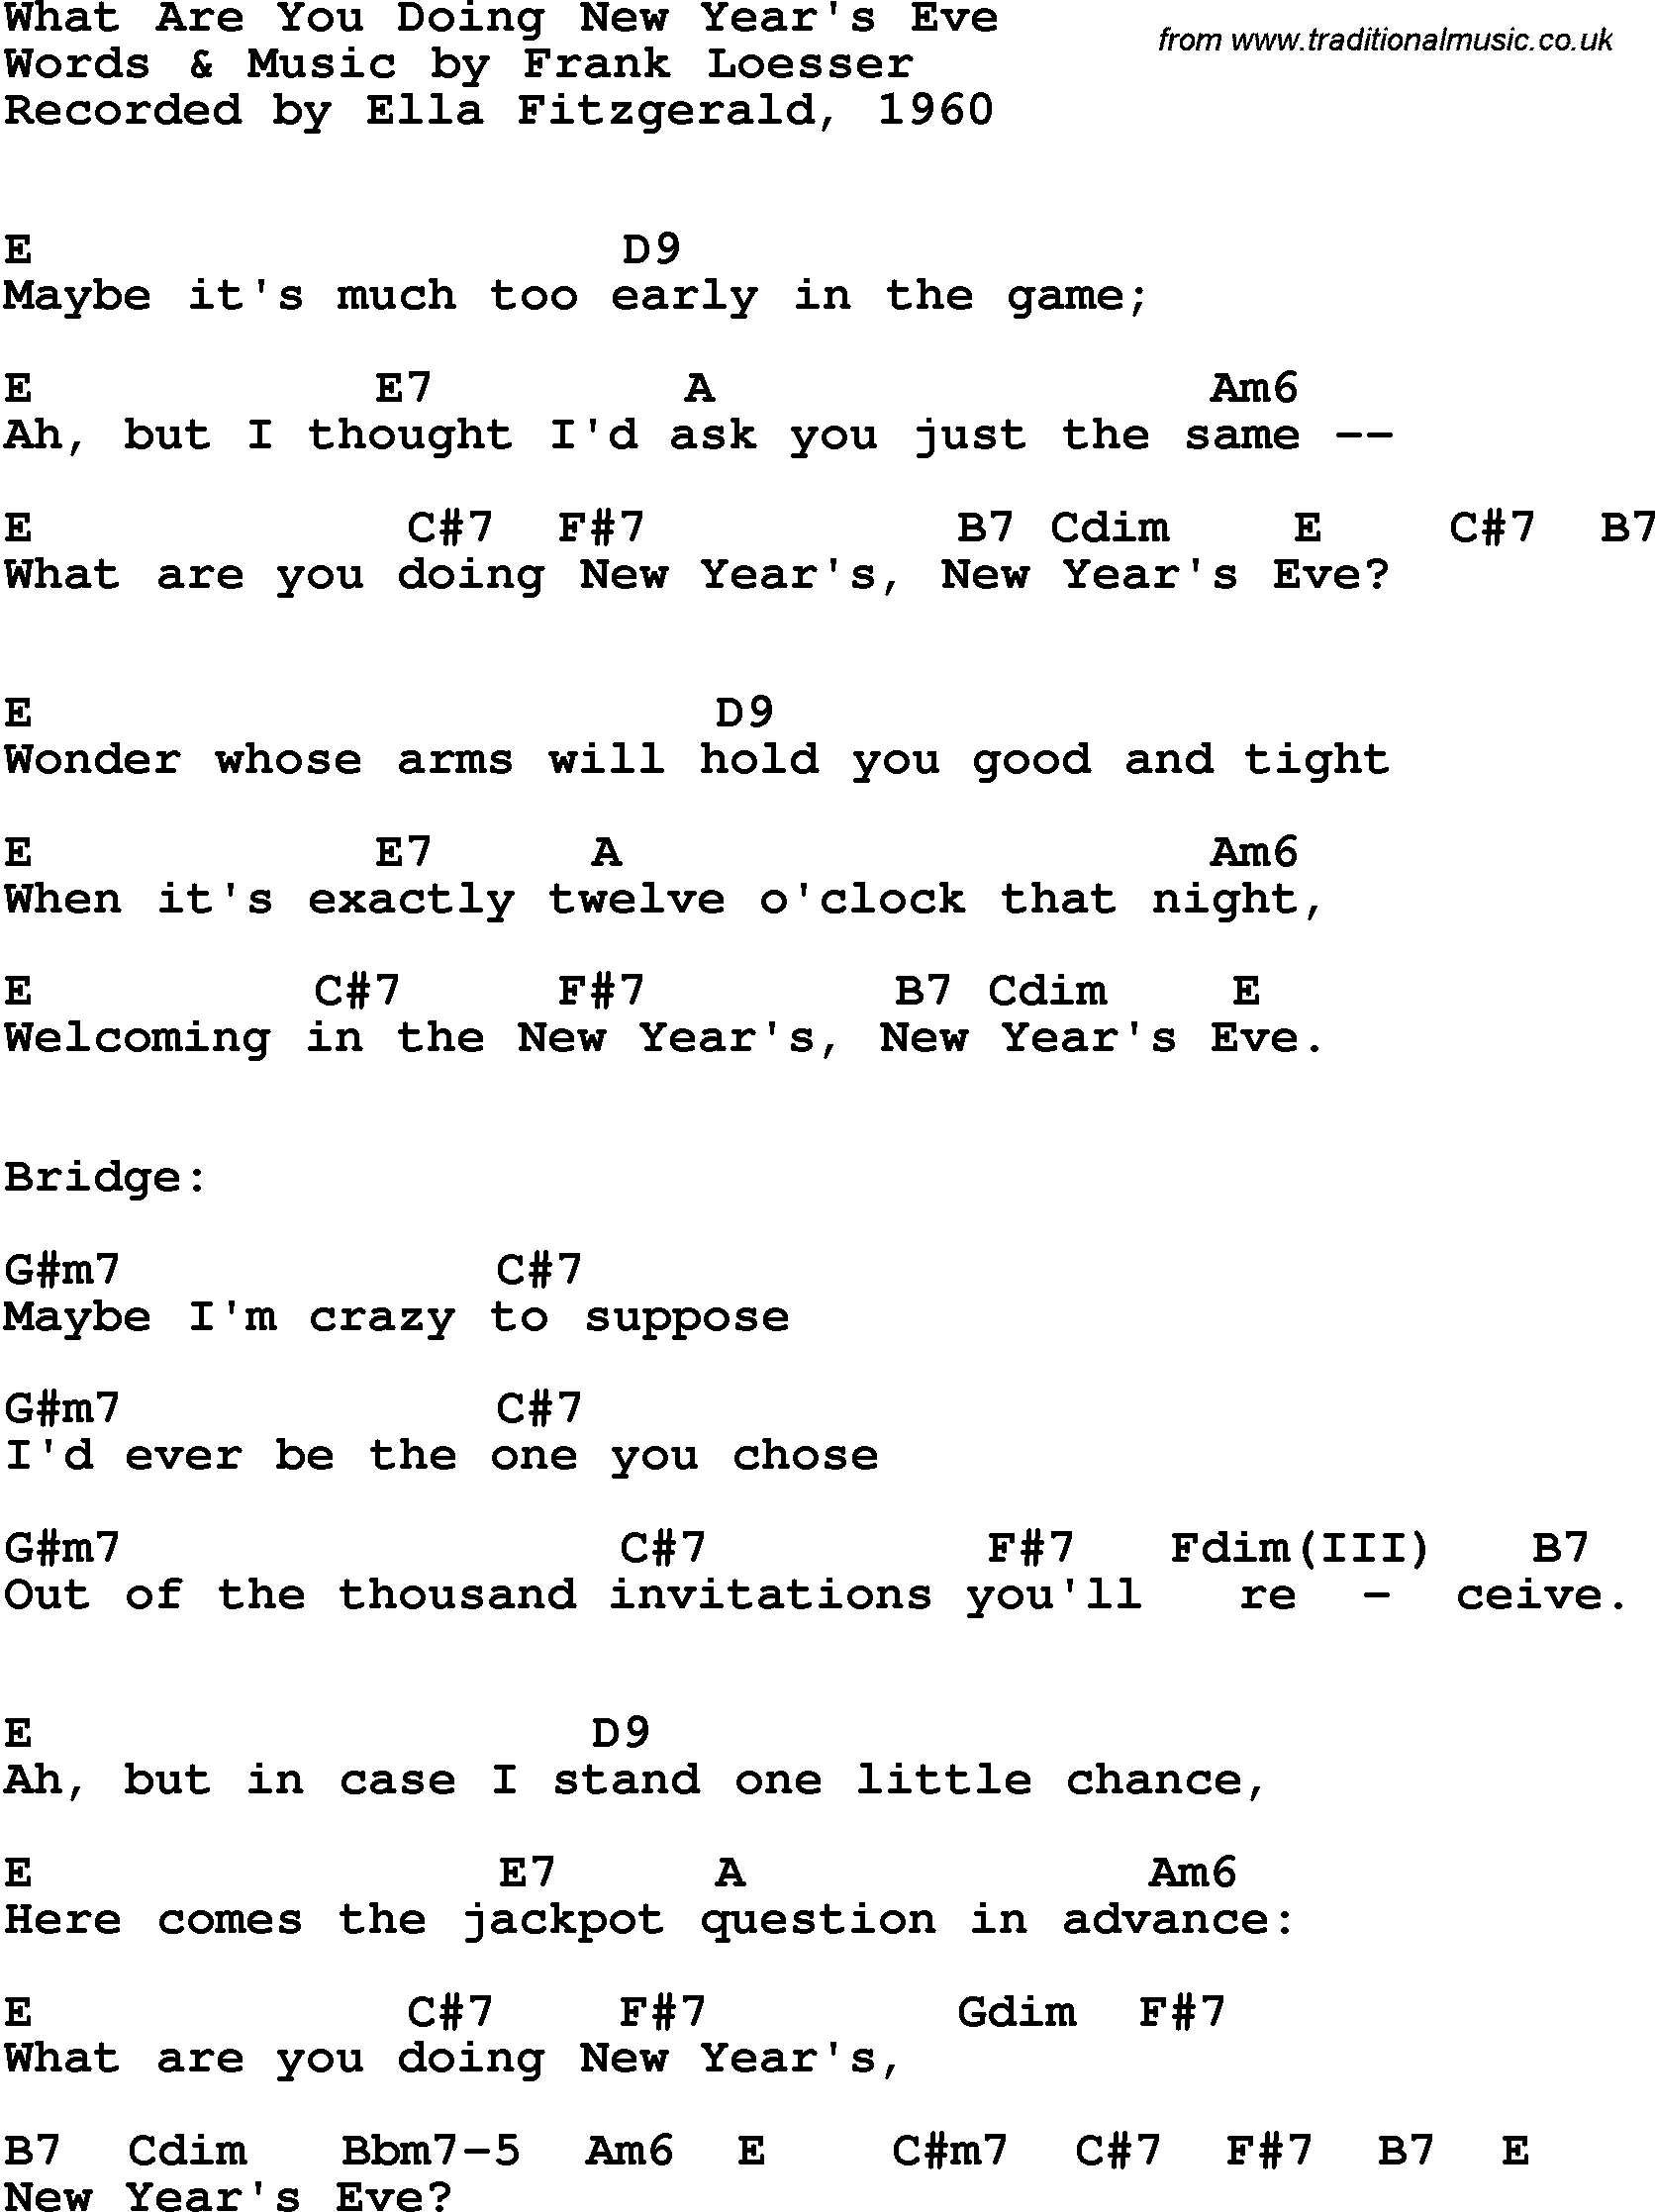 Song Lyrics with guitar chords for What Are You Doing New Year's Eve - Ella Fitzgerald, 1960